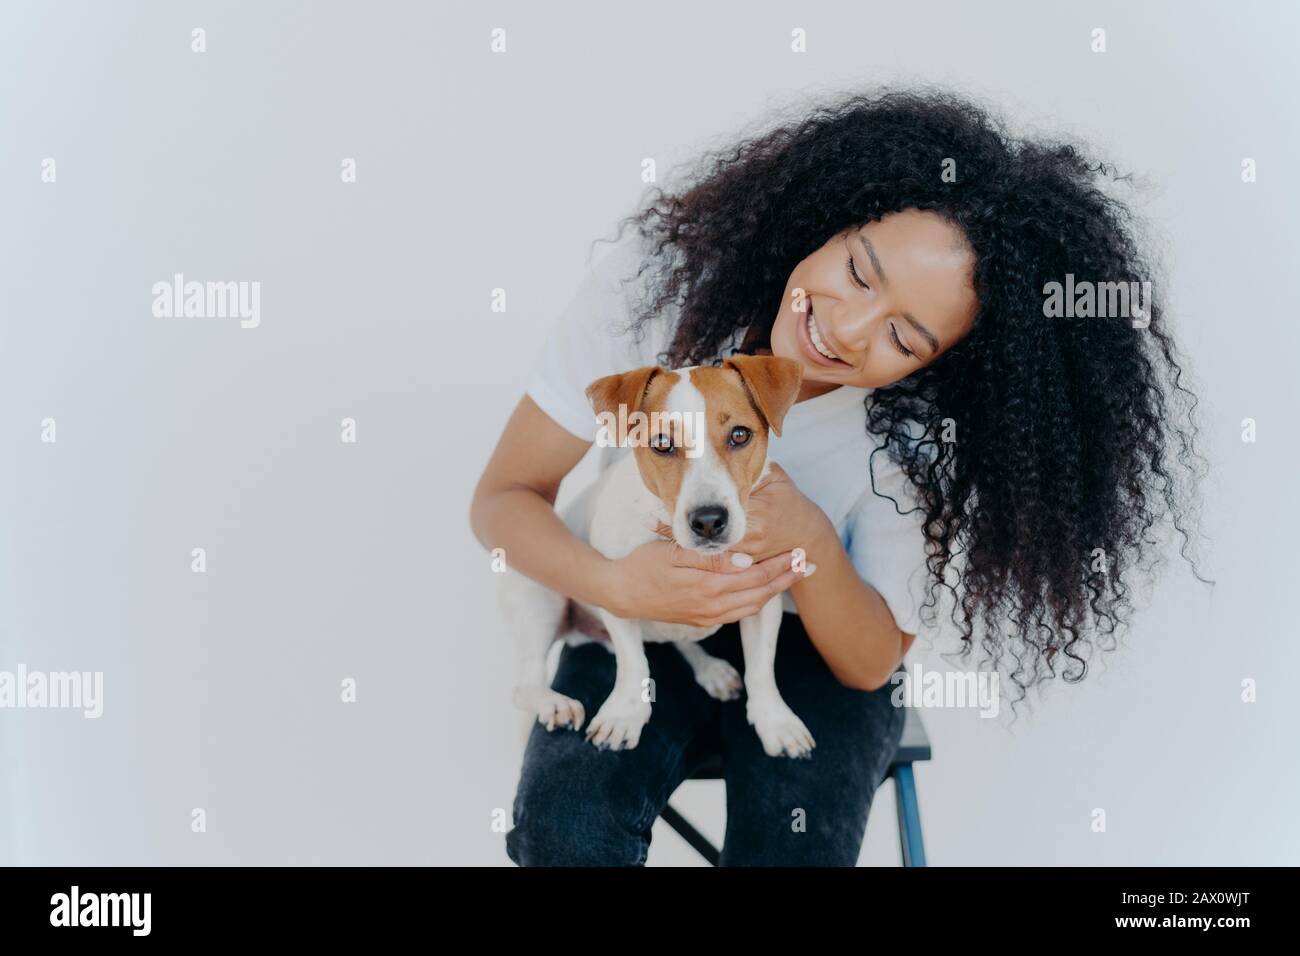 Glad dark skinned girl plays with jack russell terrier dog, have fun together, poses against white background, dressed casually. Happy Afro girl poses Stock Photo